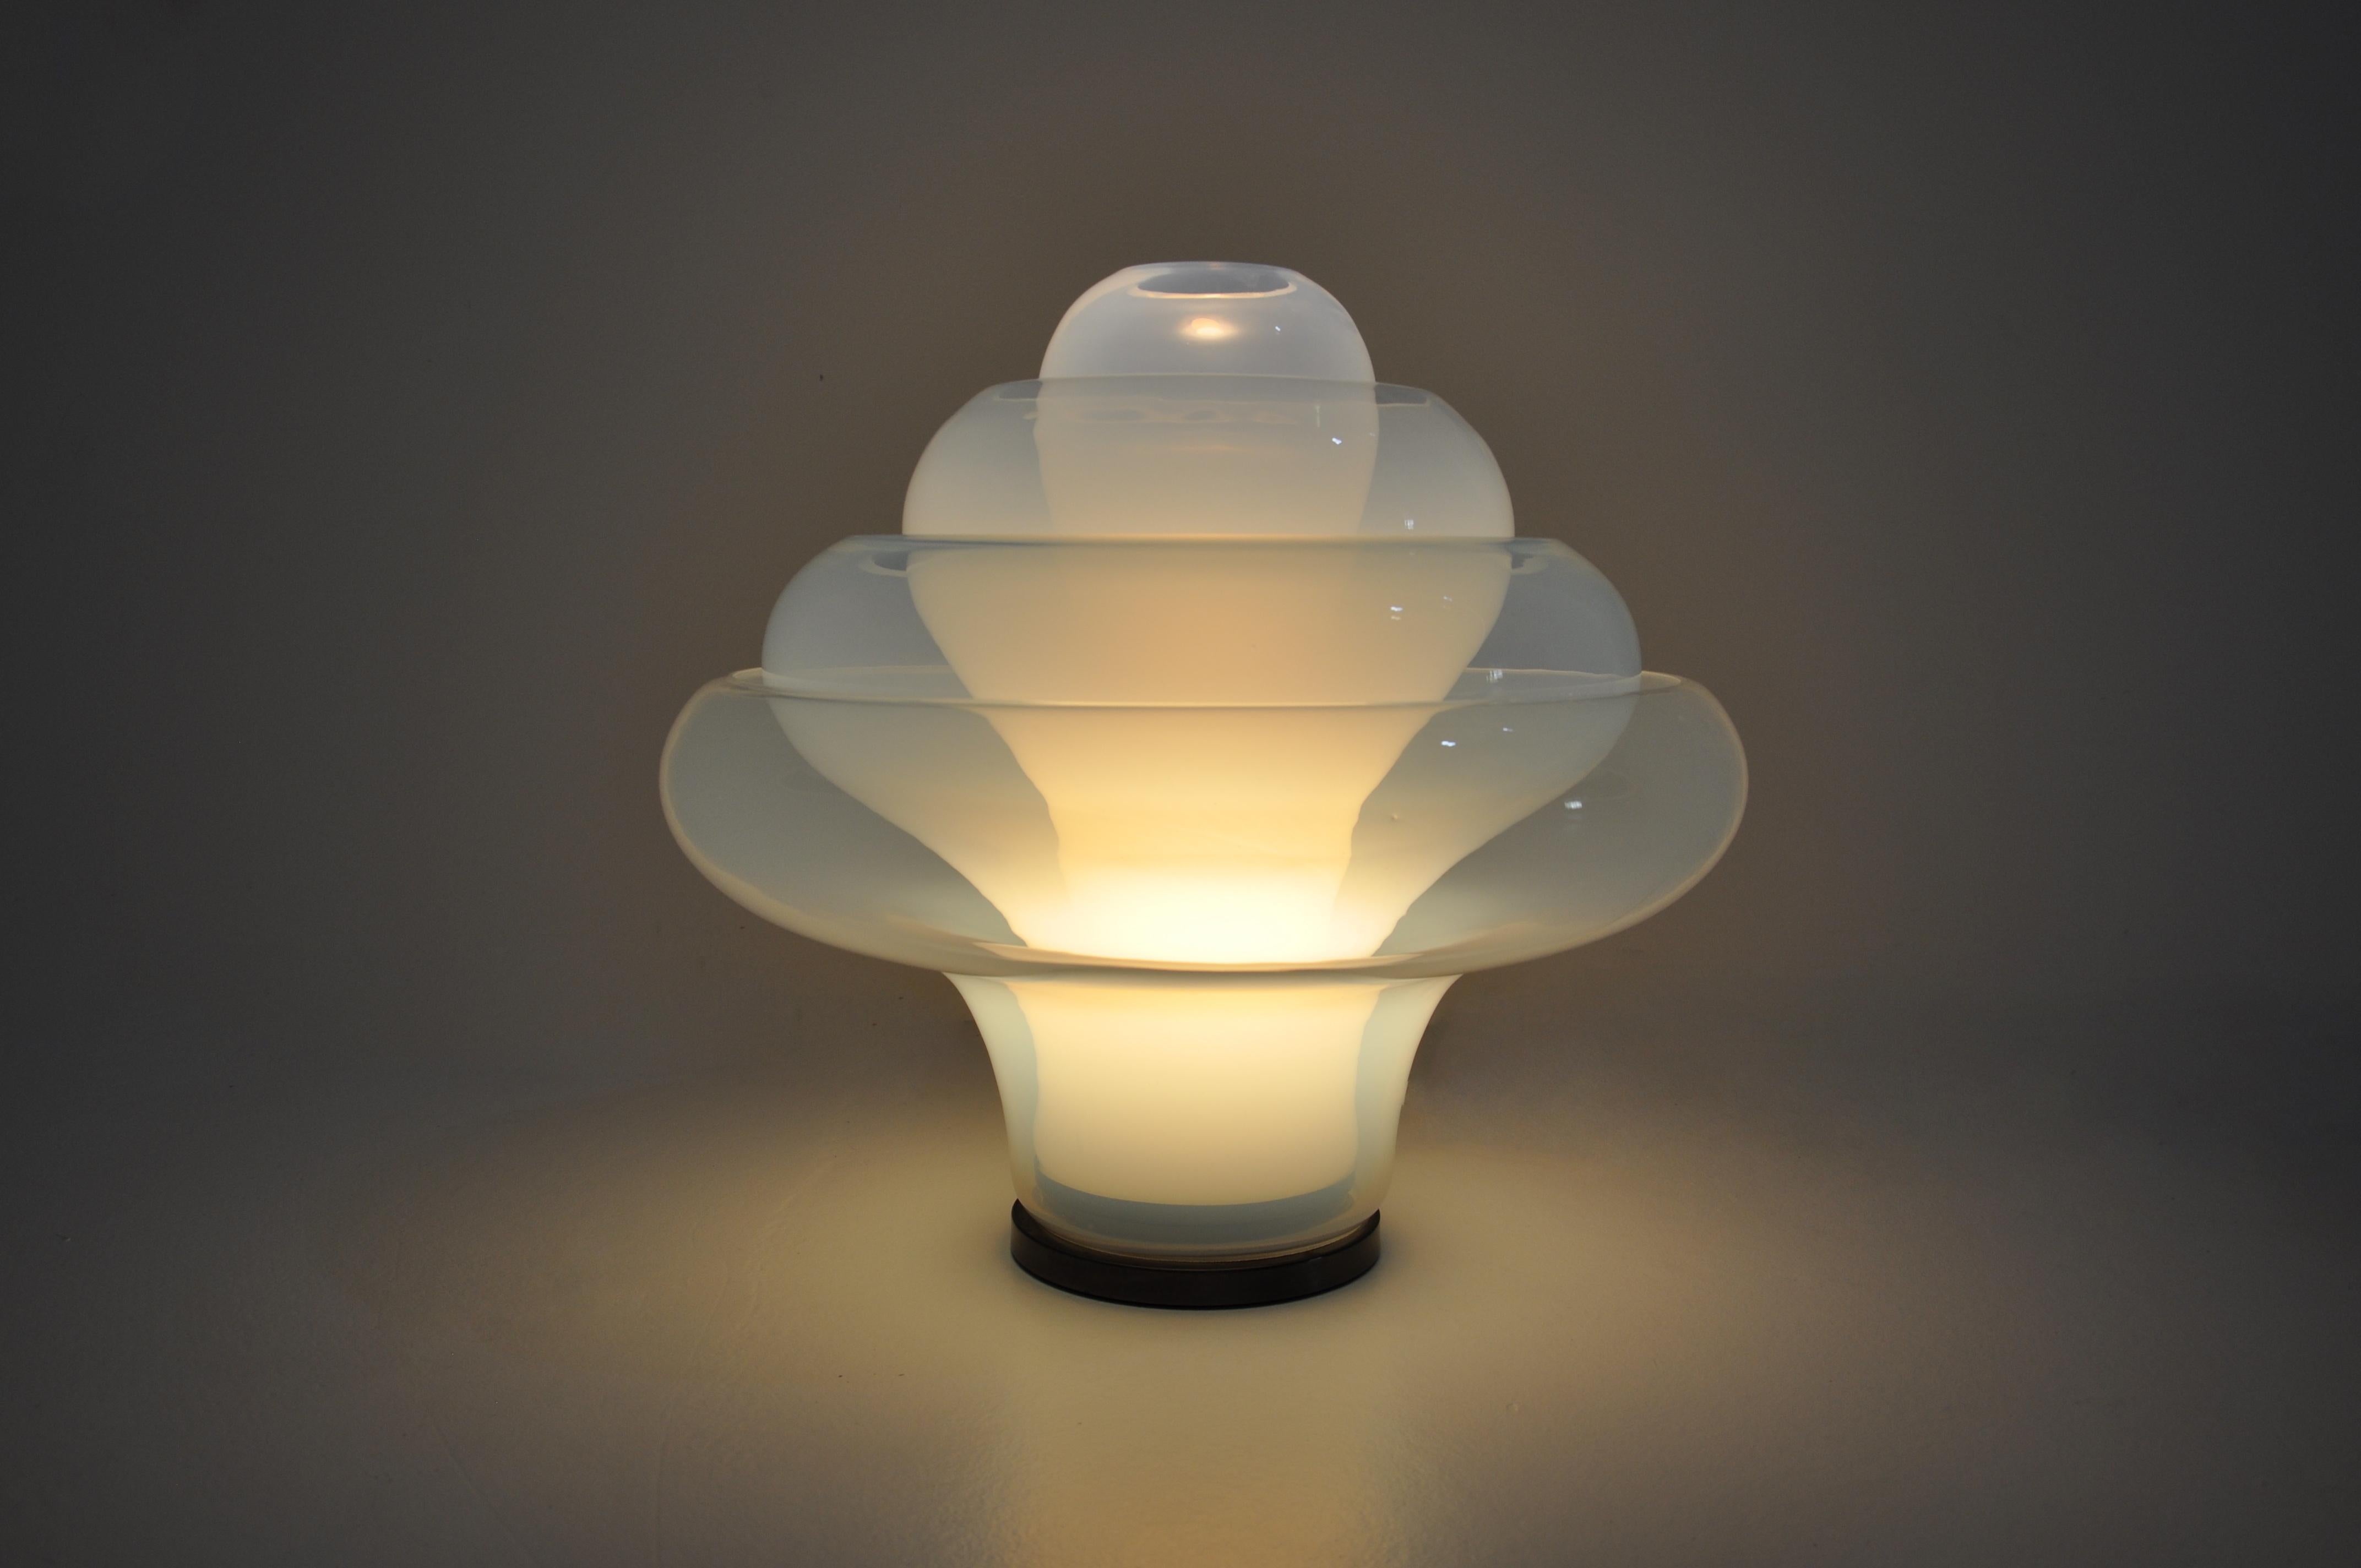 Murano glass lamp in the shape of a lotus. Metal base. Model: LT305 by Carlo Nason. Wear due to age and time